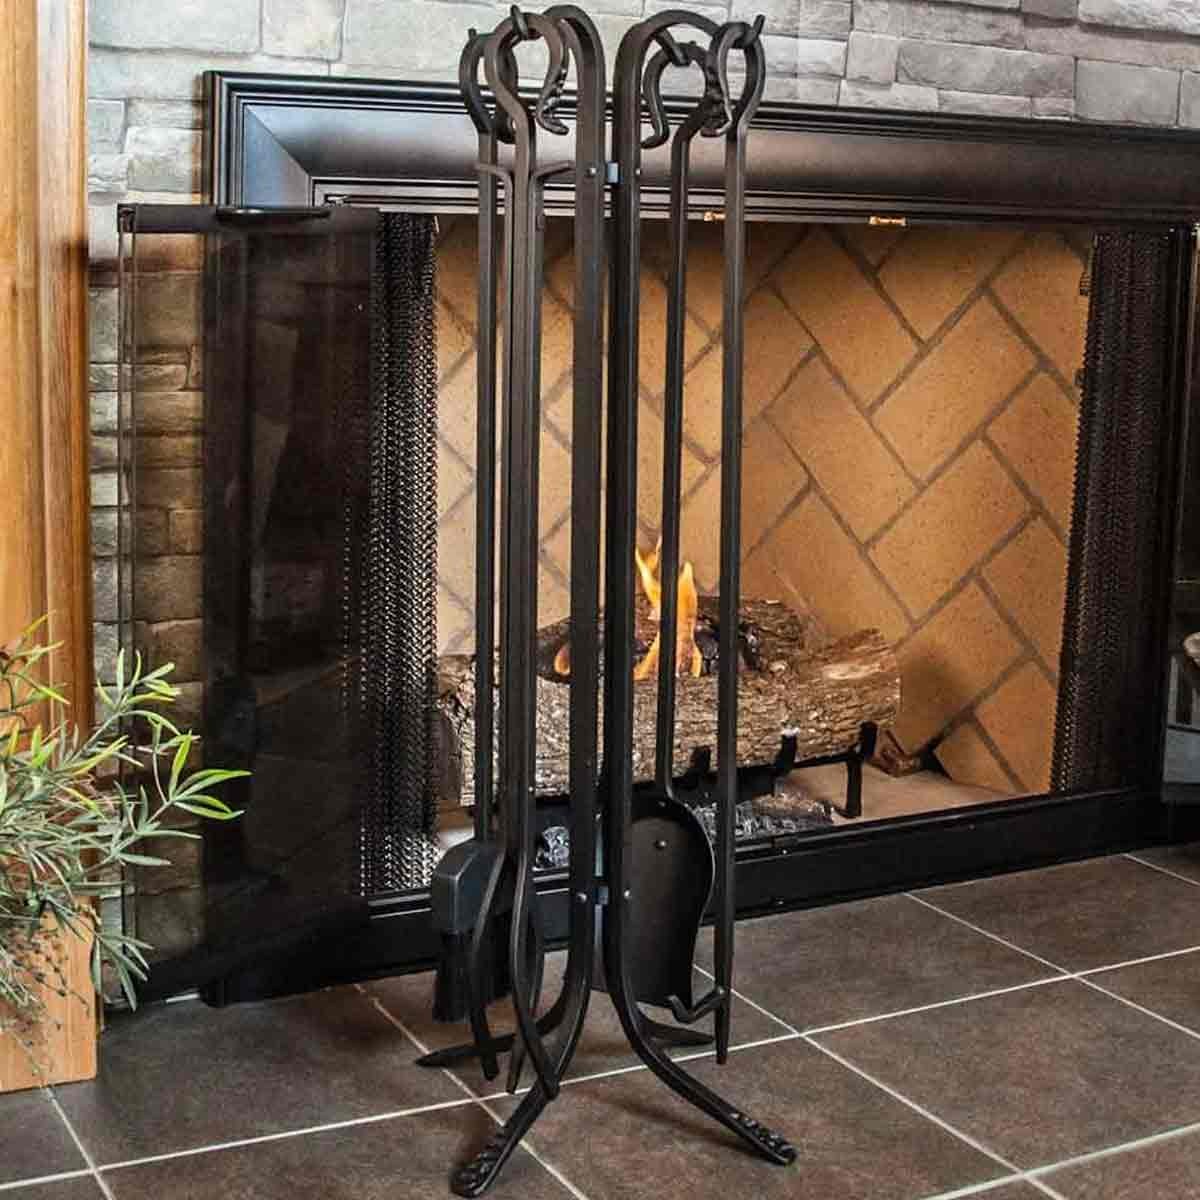 5 Piece Fireplace tool Set Lovely Wood Stove tools tool Sets Fireplace tool Set